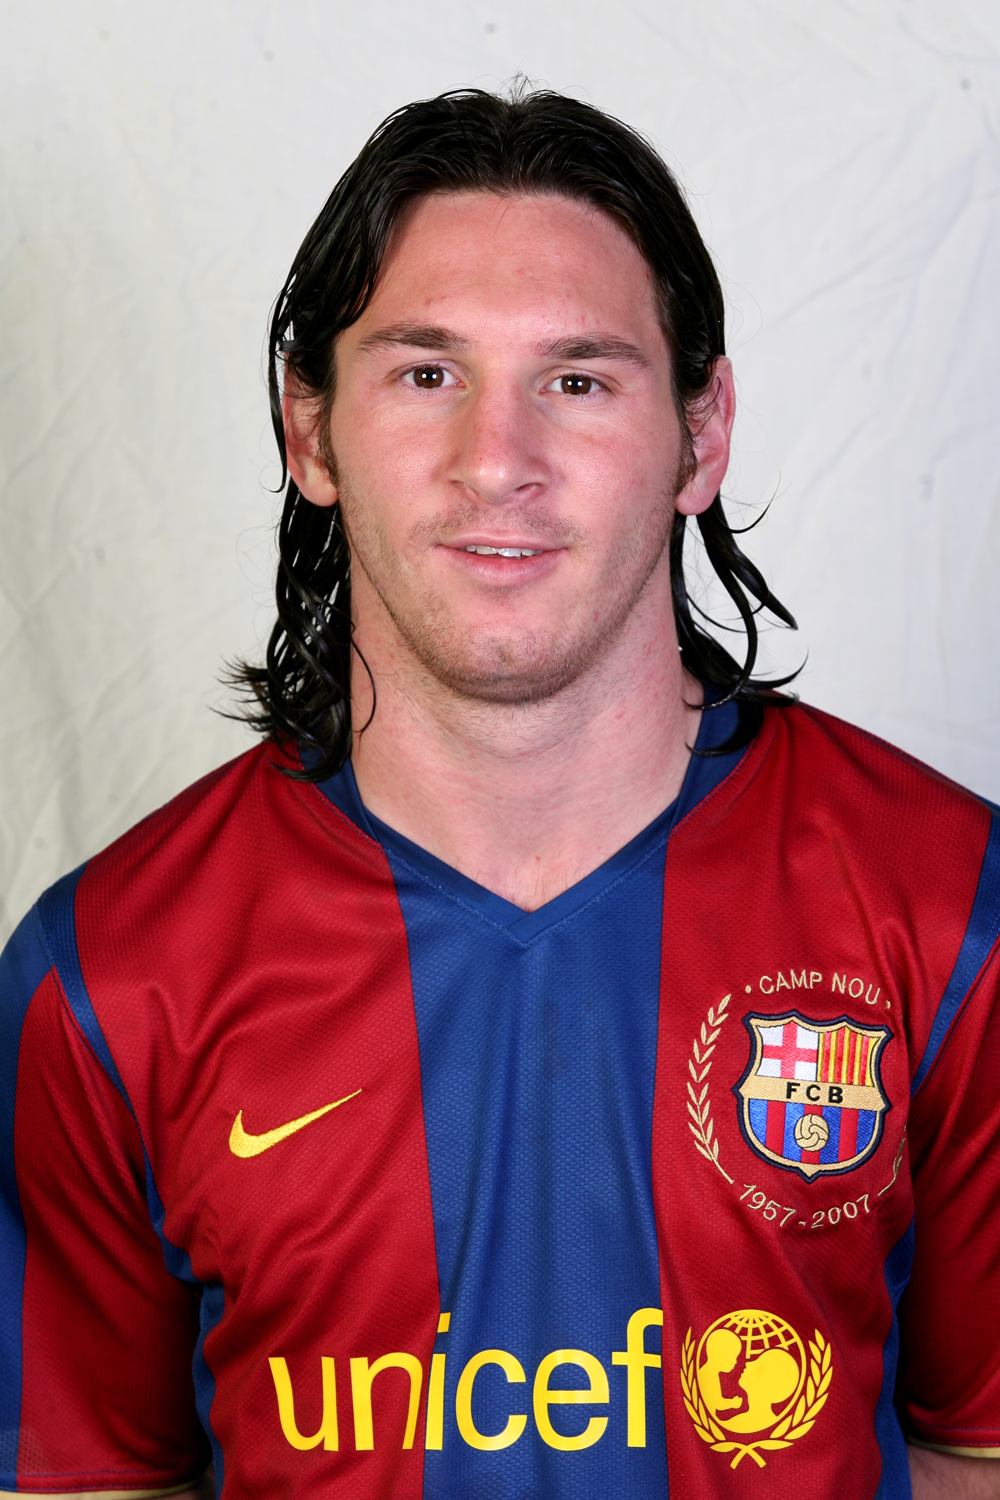  lionel messi. lionel messi wallpapers 2009. 